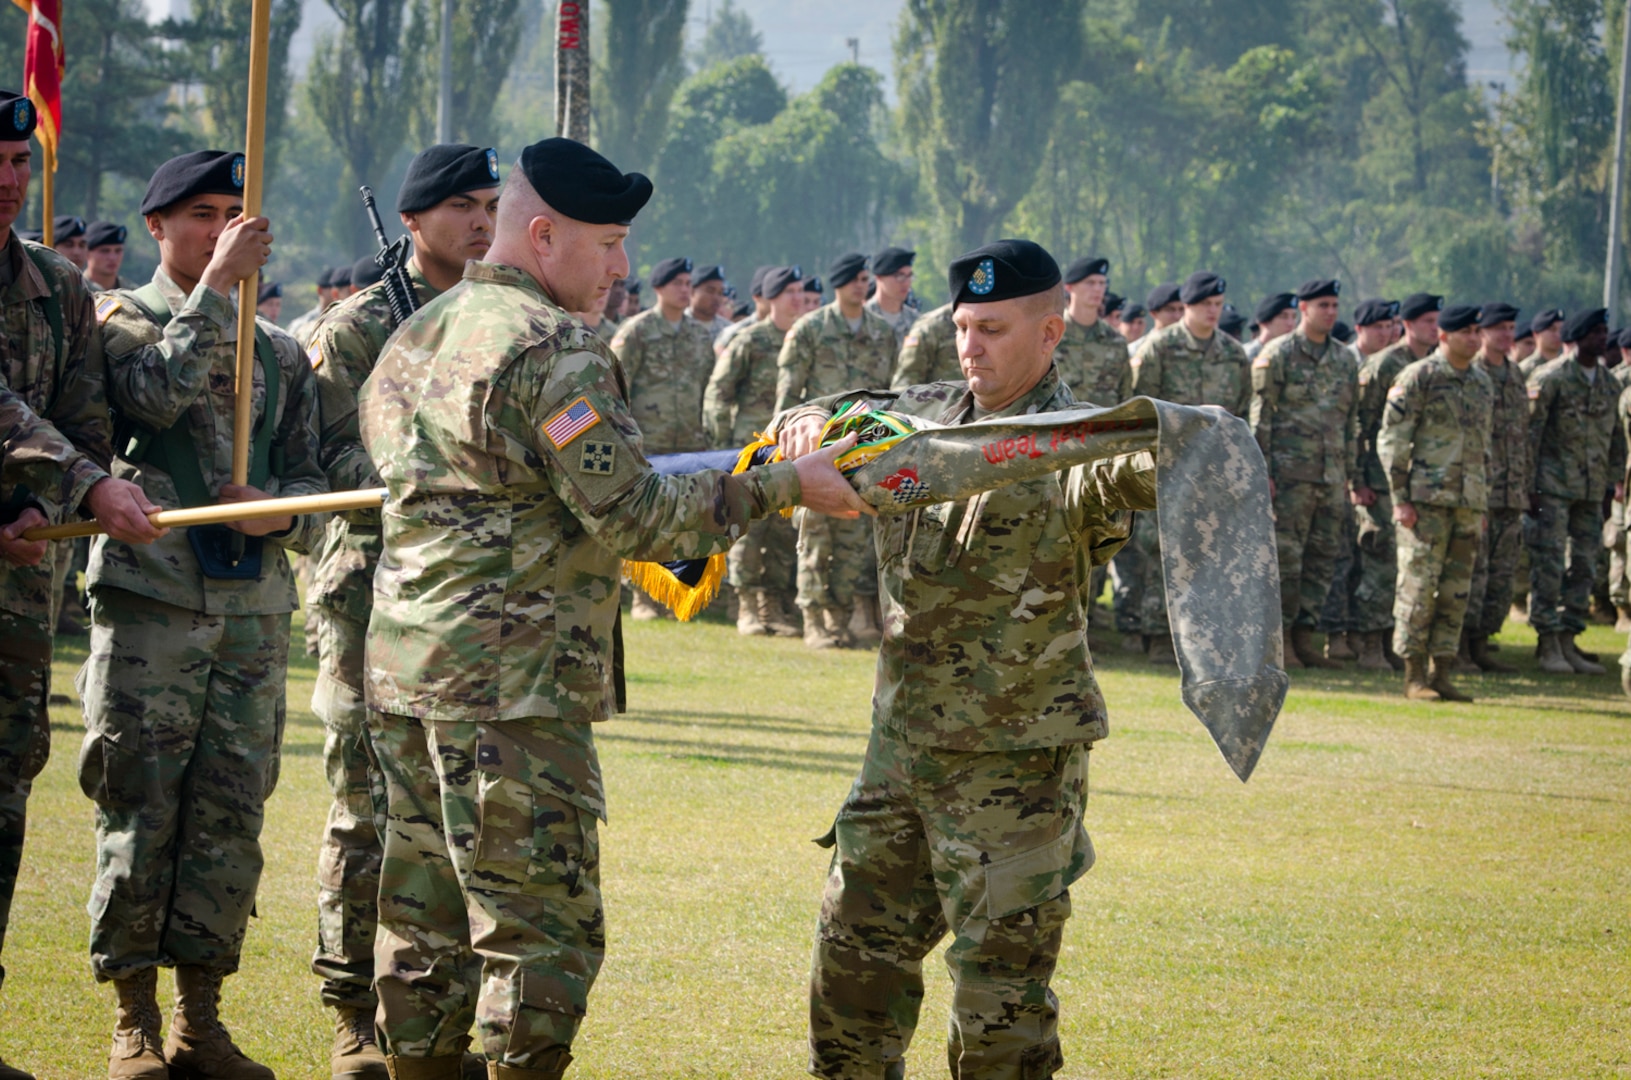 Col. Timothy Hayden (left) and Command Sgt. Maj. Dale Sump (right), the commander and command sergeant major of the 1st Armored Brigade Combat Team, 1st Infantry Division, respectively, uncase the brigade's colors during a transfer of authority ceremony on Indianhead Field, Oct. 28, 2016.  During the ceremony, the brigade officially took charge of the rotational mission on the Korean peninsula from the 1st ABCT, 1st Cavalry Division. 